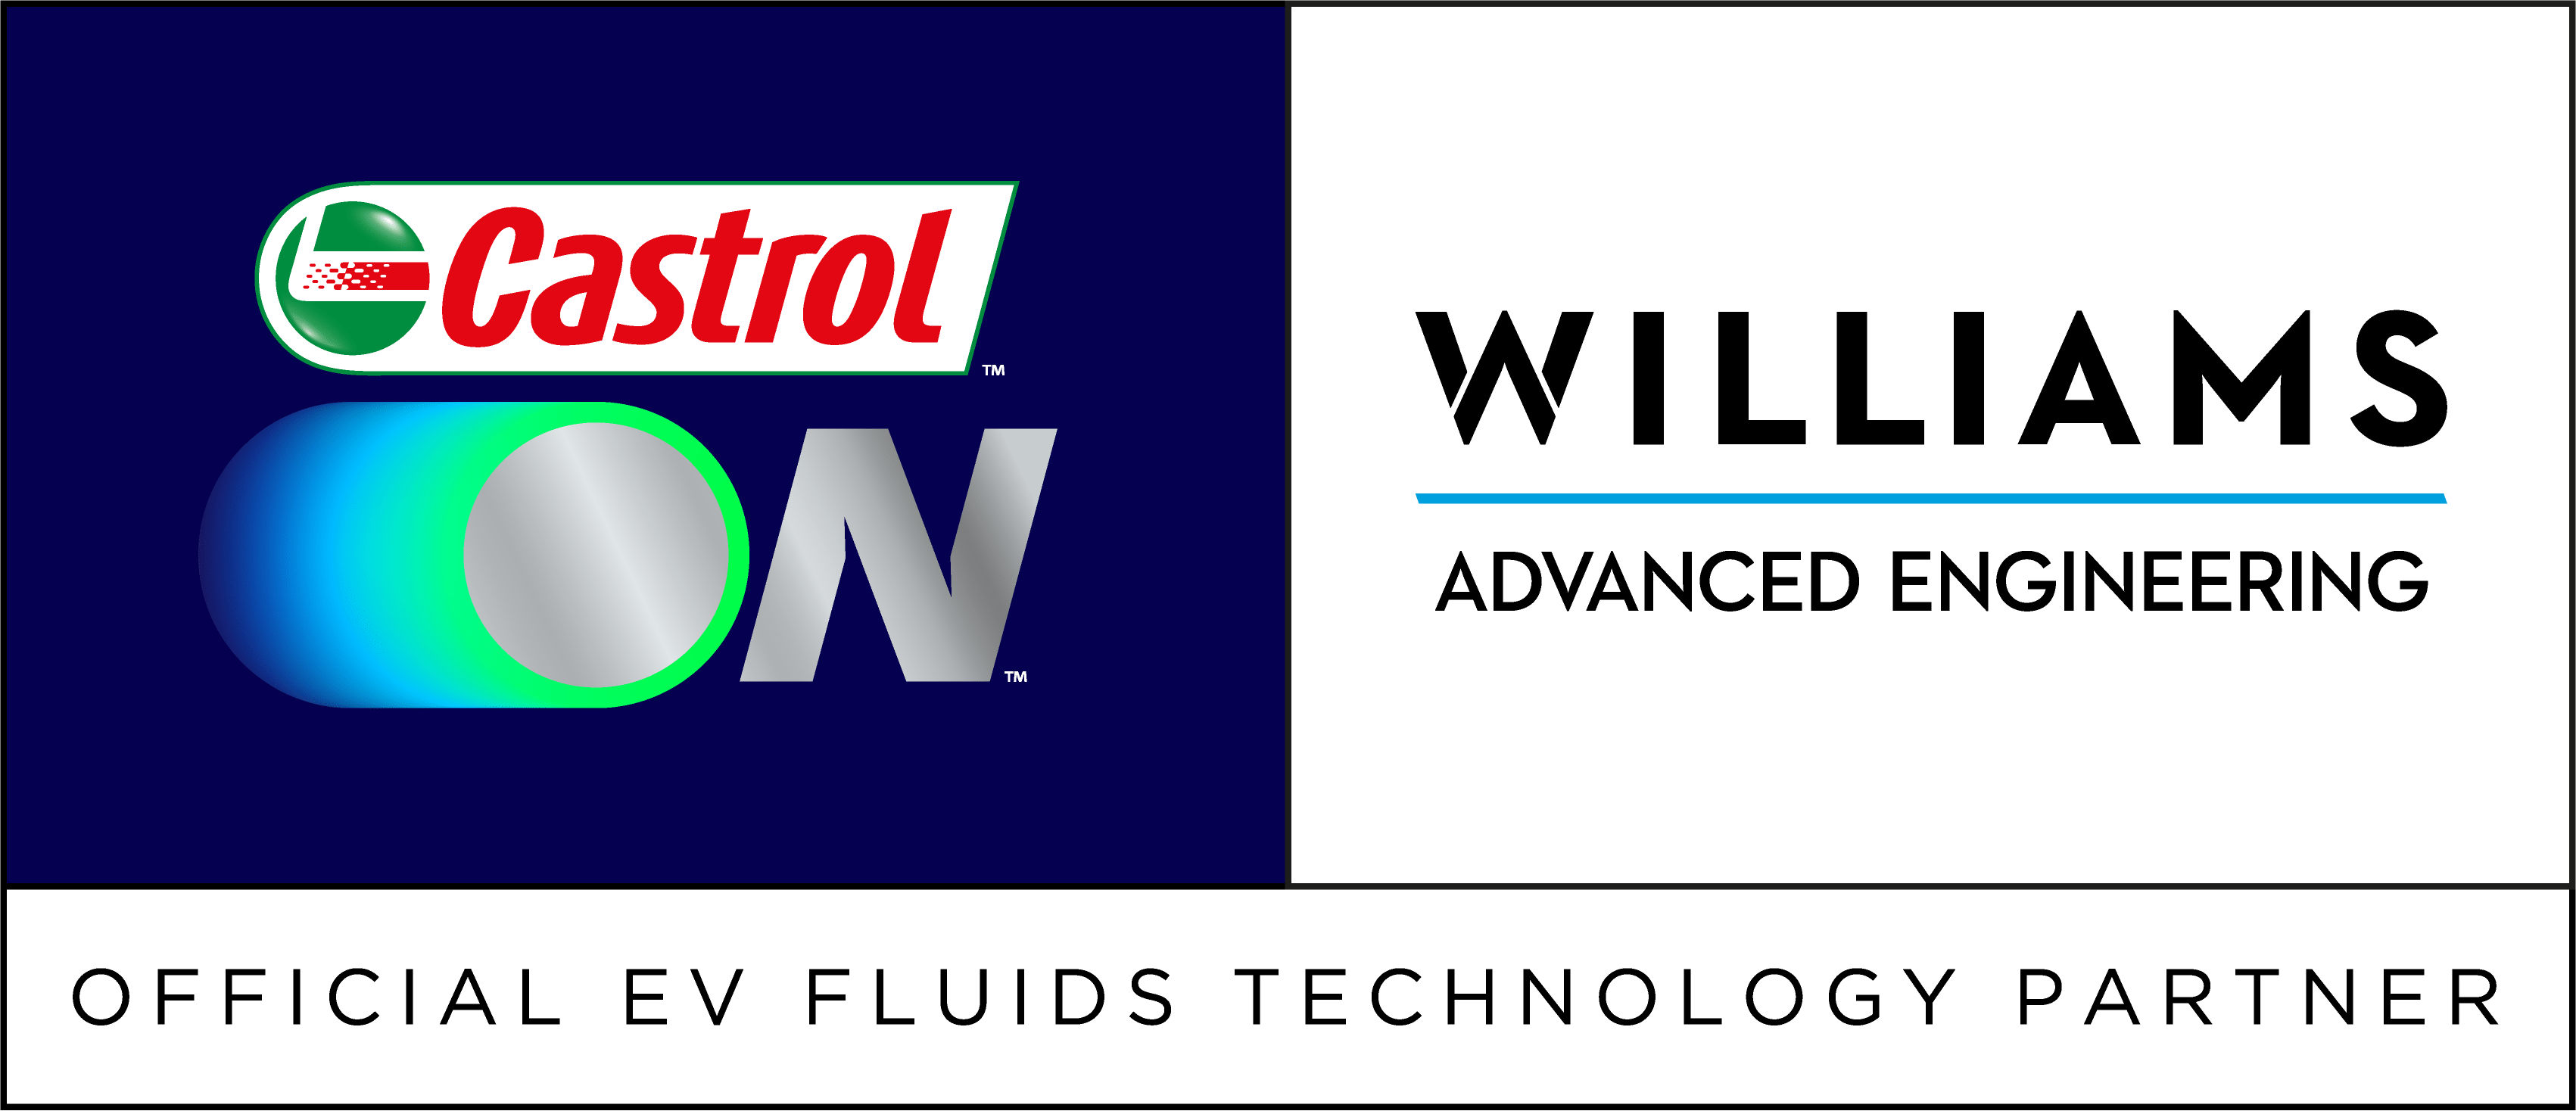 Williams Advanced Engineering and Castrol announce strategic five year partnership to co-develop Electric Vehicle (EV) Fluids